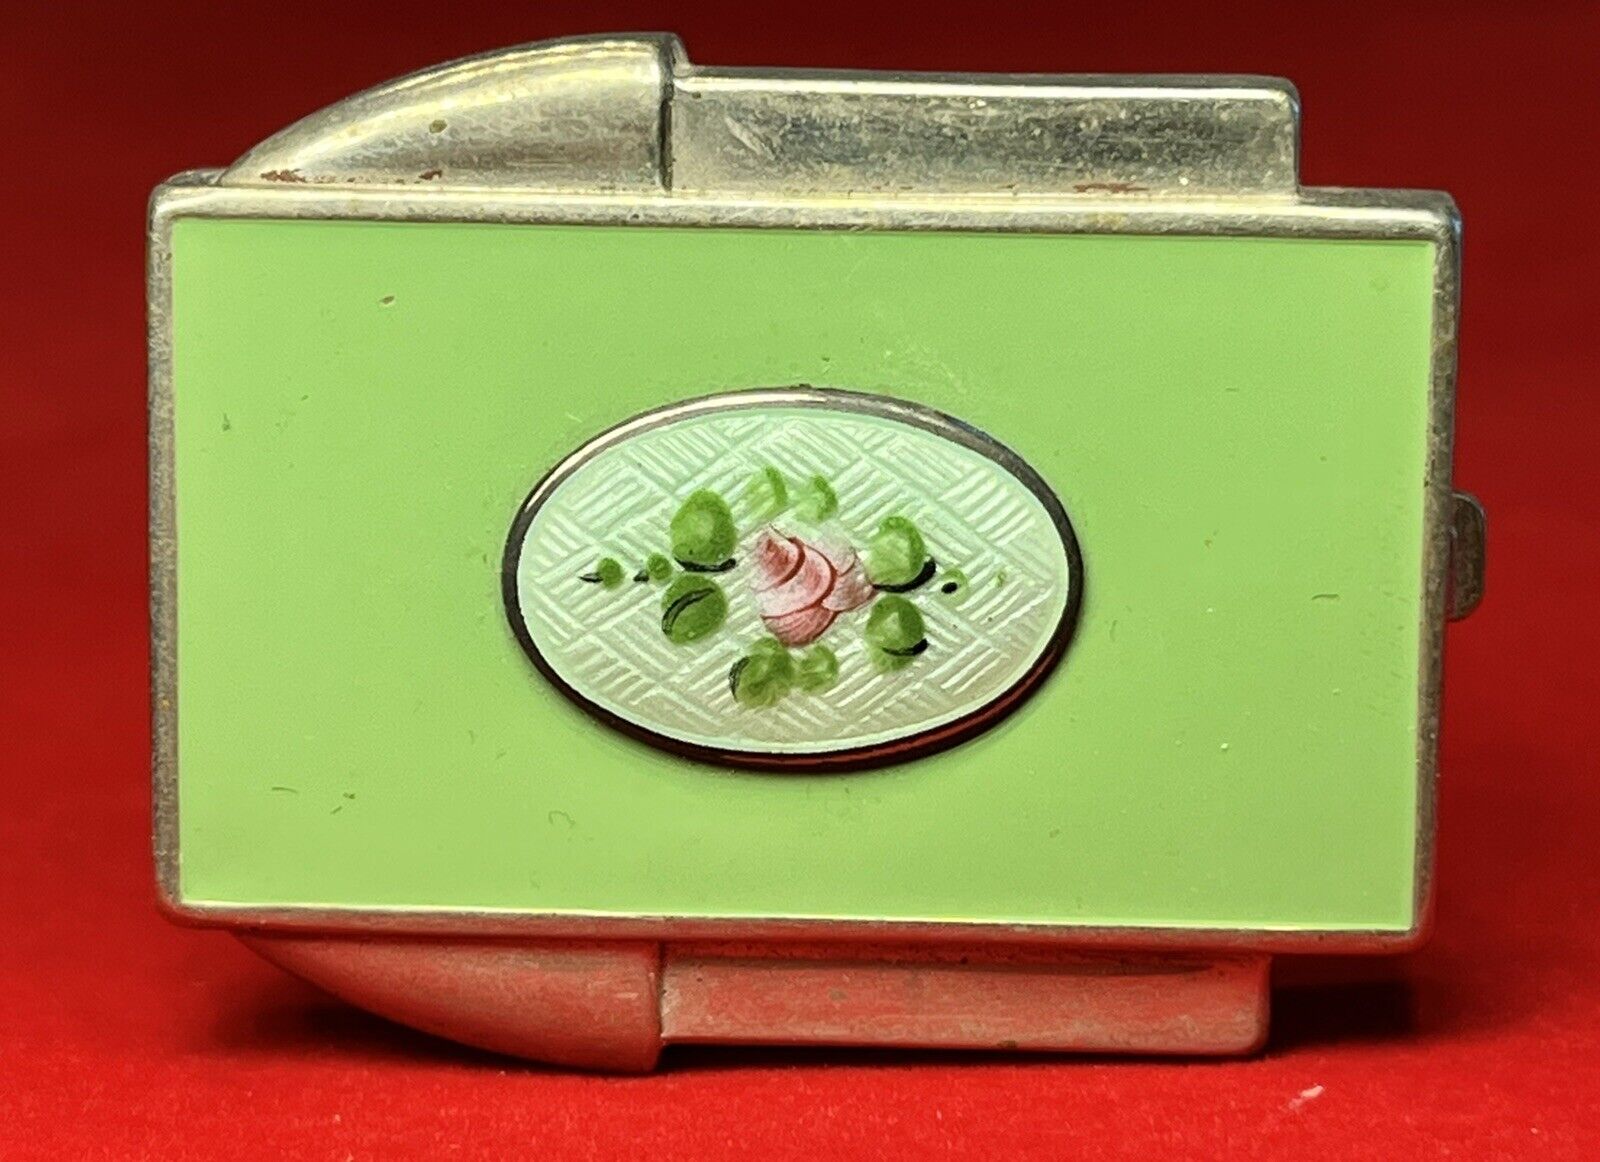 Vintage French Enamel on Stainless Steel Compact 